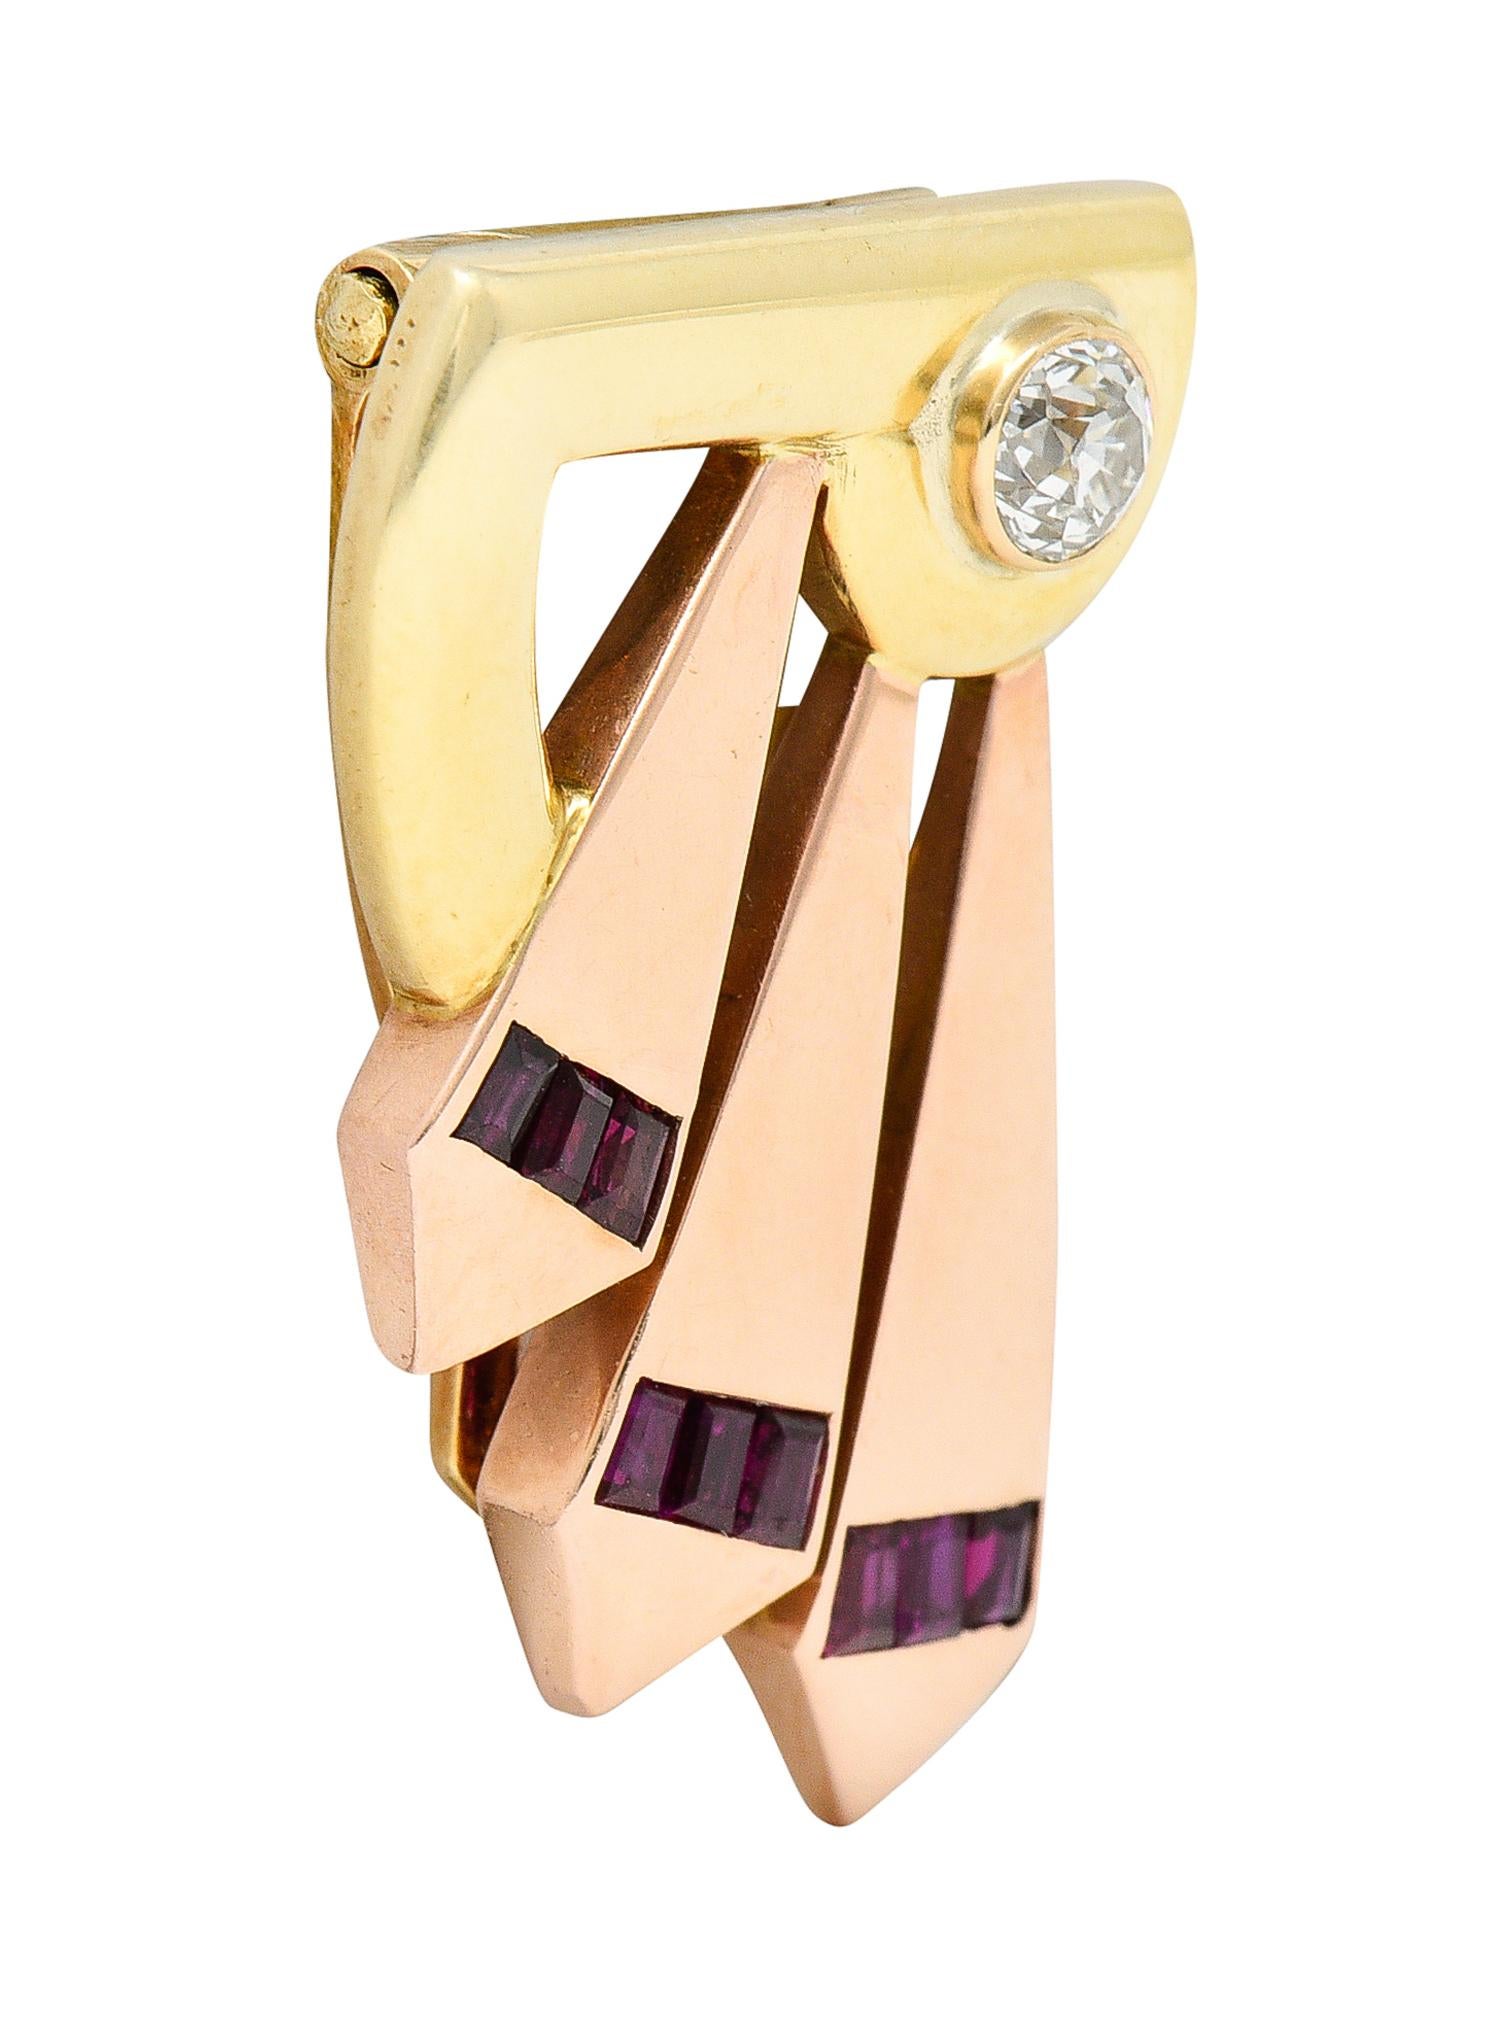 Clip style brooch is designed as a yellow gold form with fanned rose gold extensions

Featuring a bezel set old mine cut diamond weighing approximately 0.40 carat - I/J color with VS clarity

With rectangular cut rubies weighing collectively